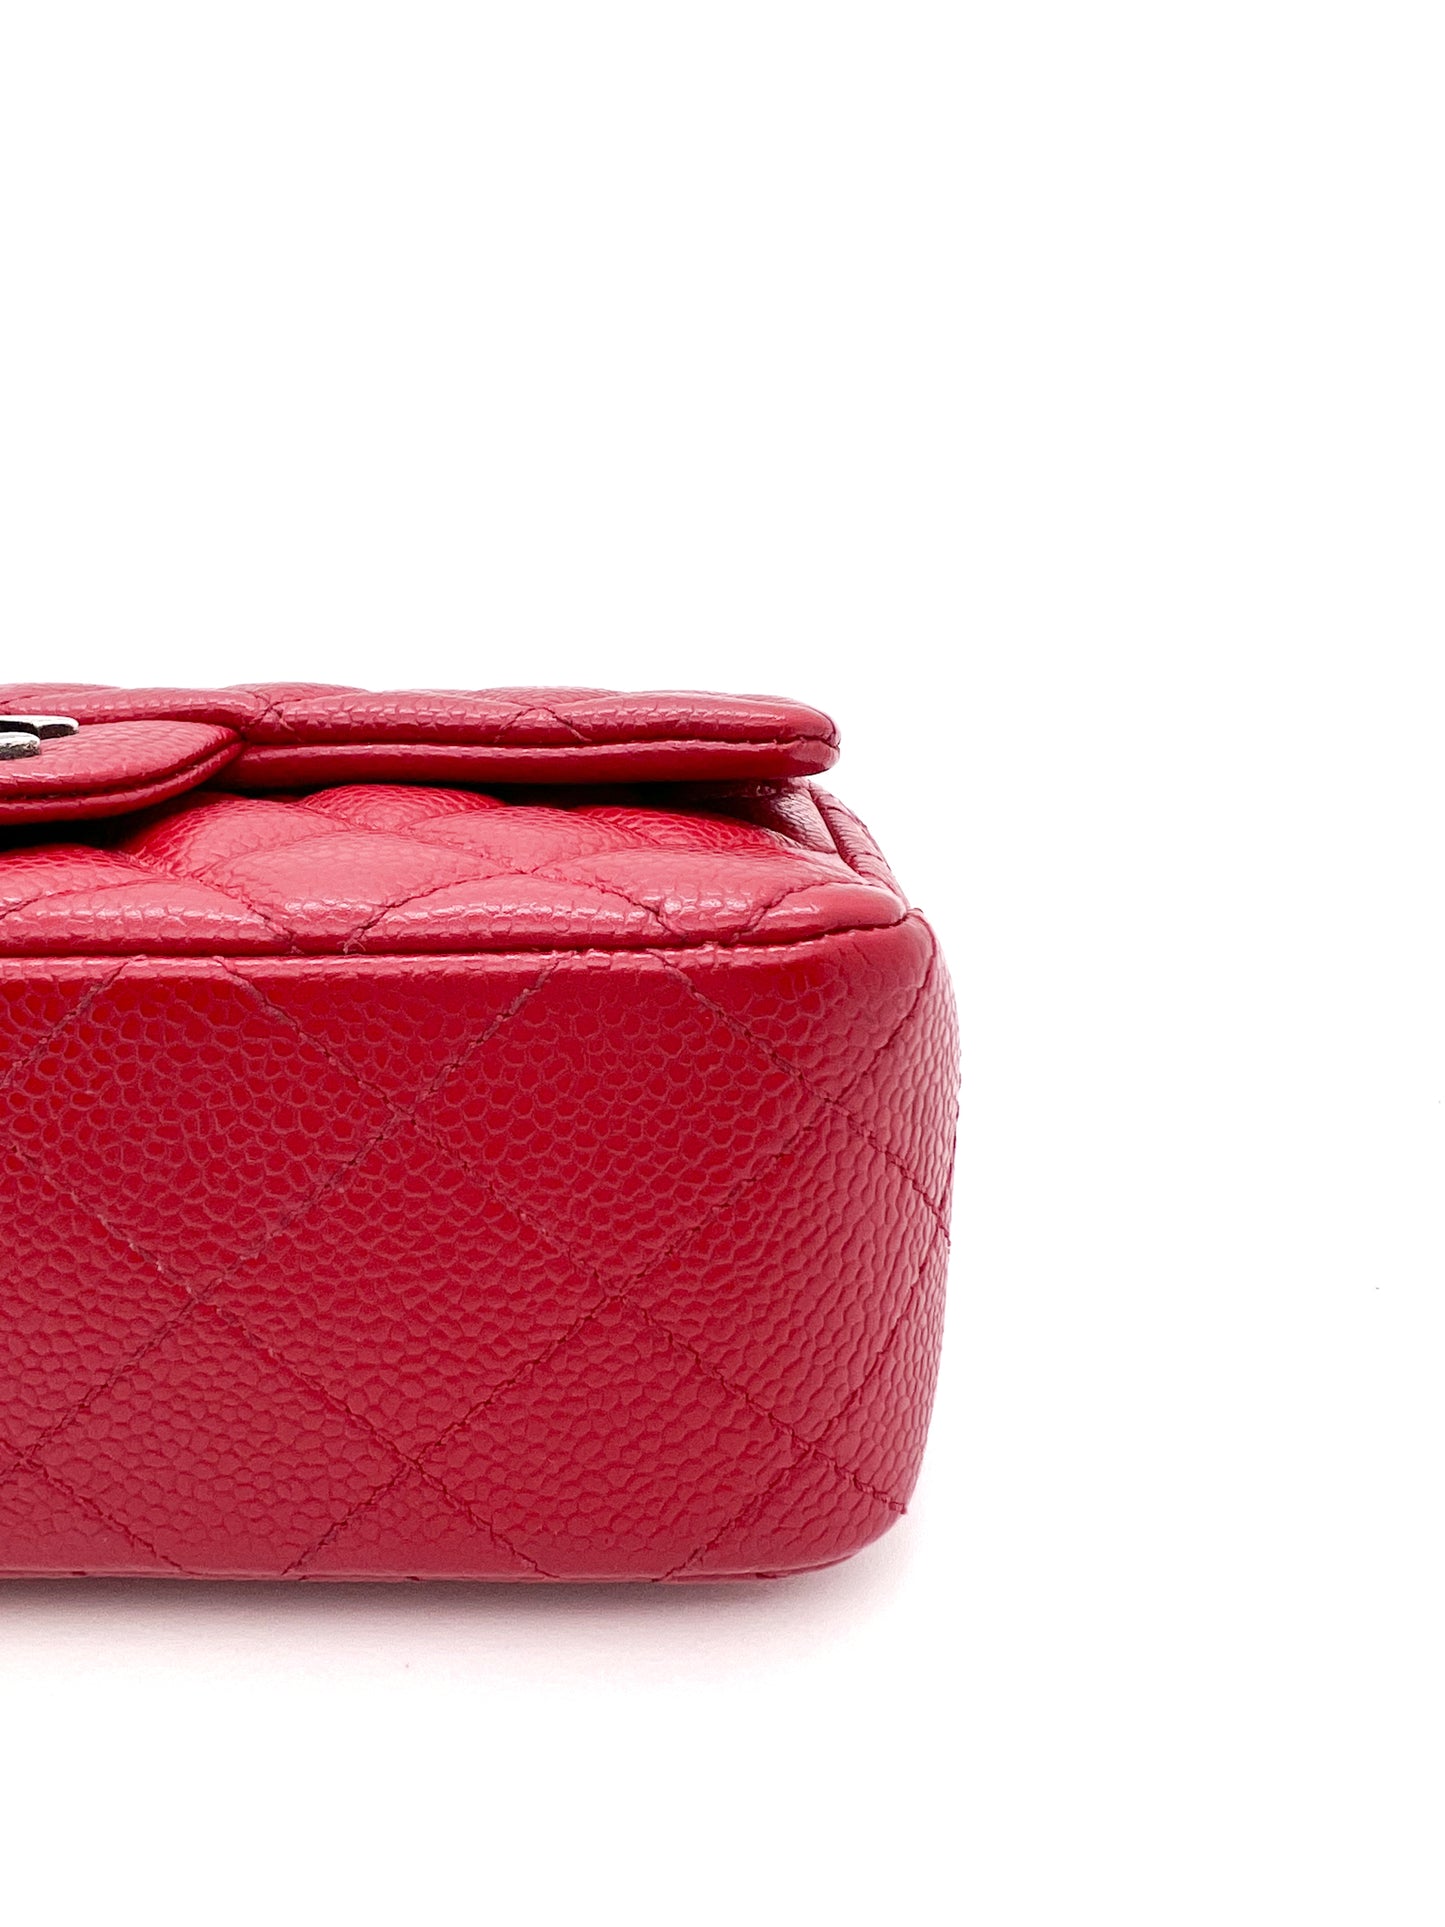 CHANEL MINI CLASSIC FLAP IN RED CAVIAR LEATHER